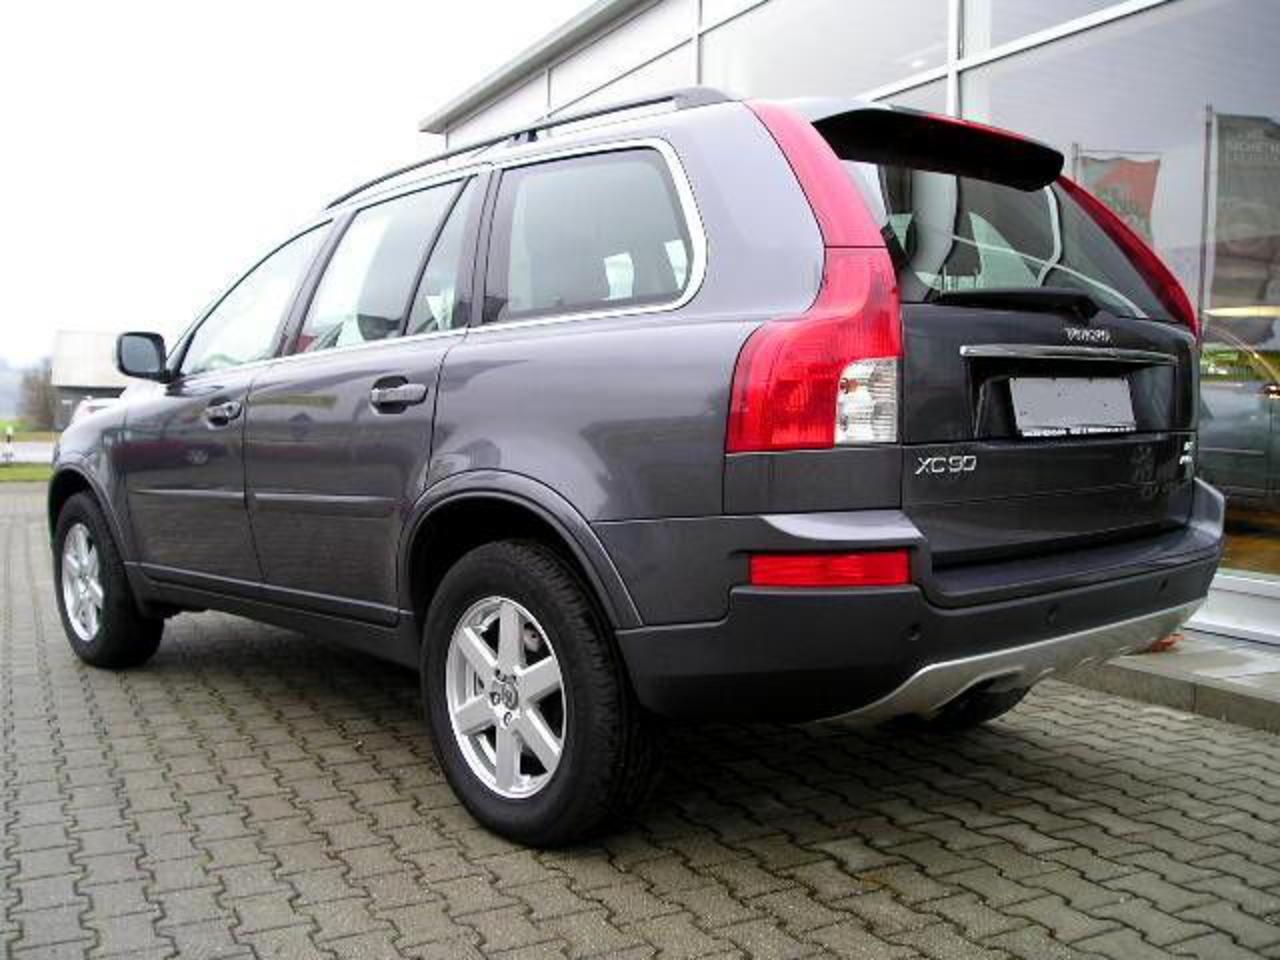 NÂ° 679 -VOLVO XC 90 D5 DPF Momentum Free delivery*